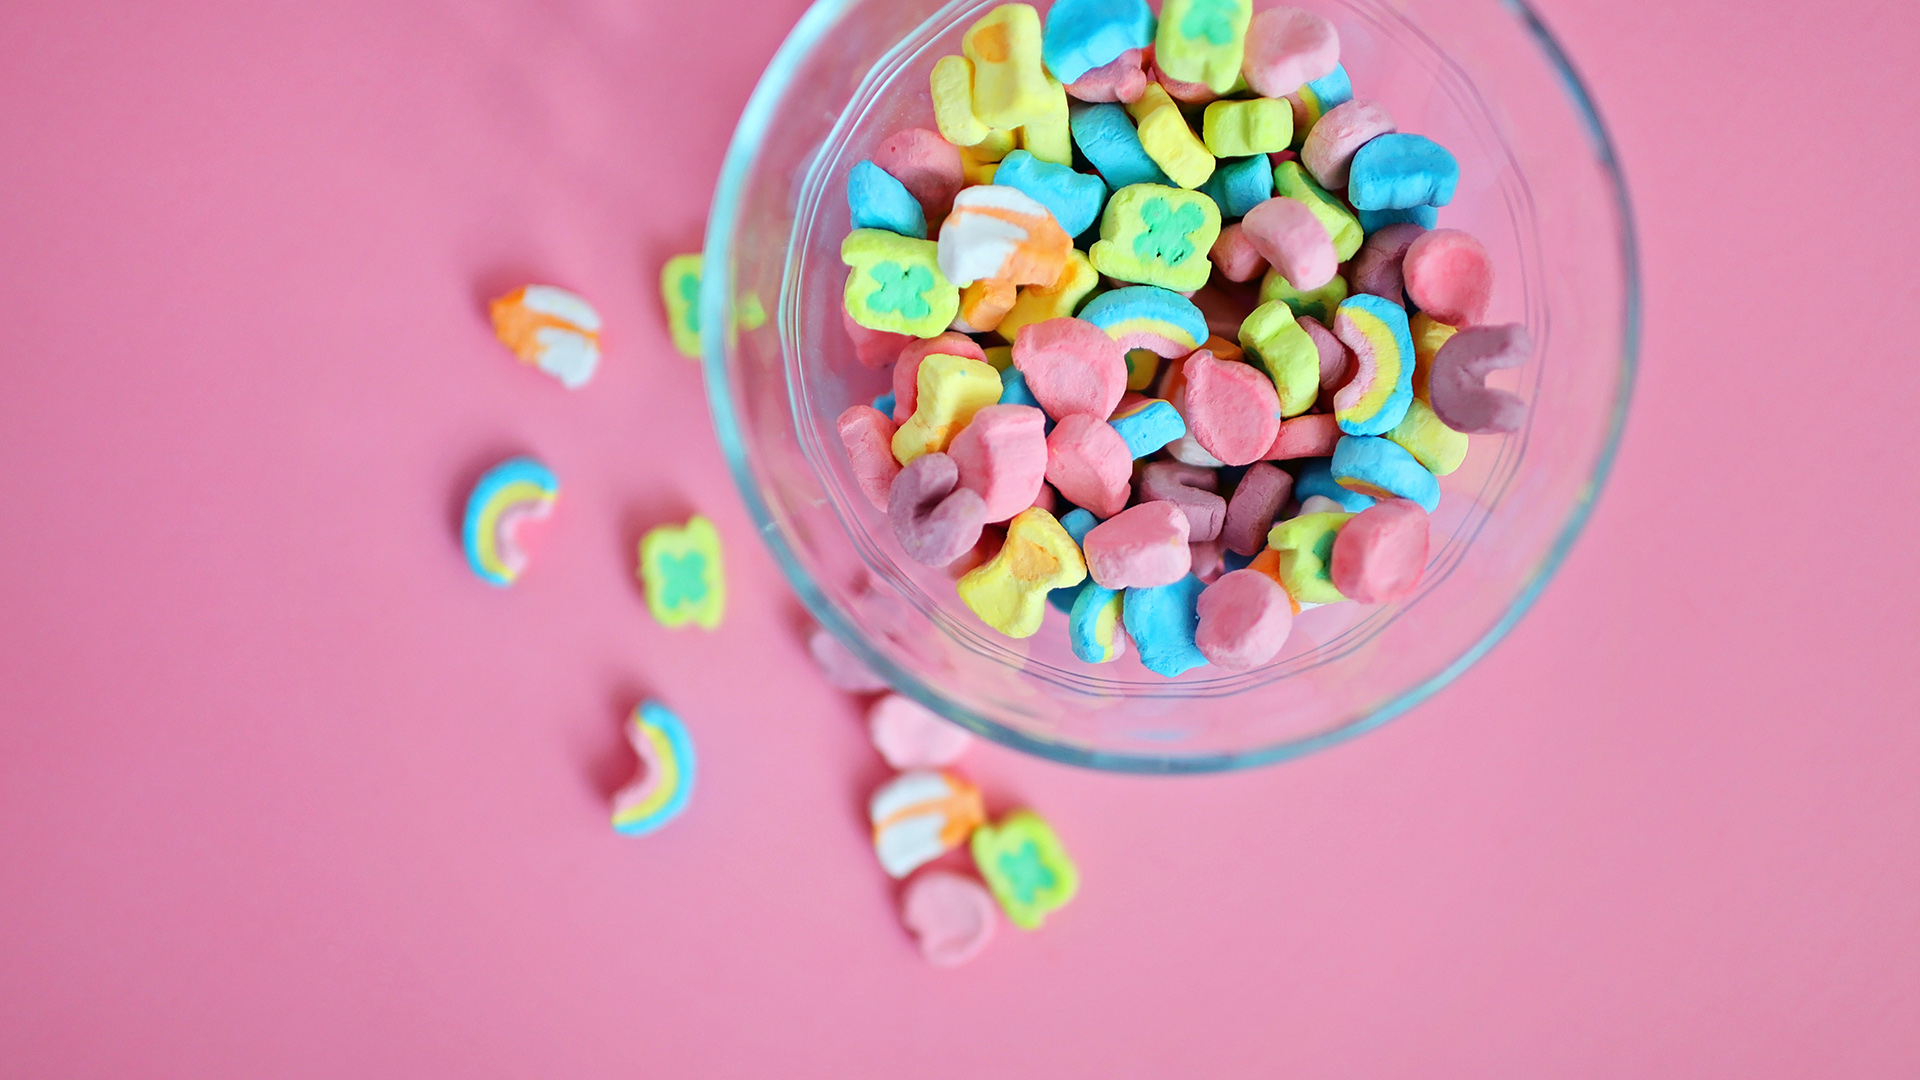 Bowl of Lucky Charms marshmellows on a pink background.